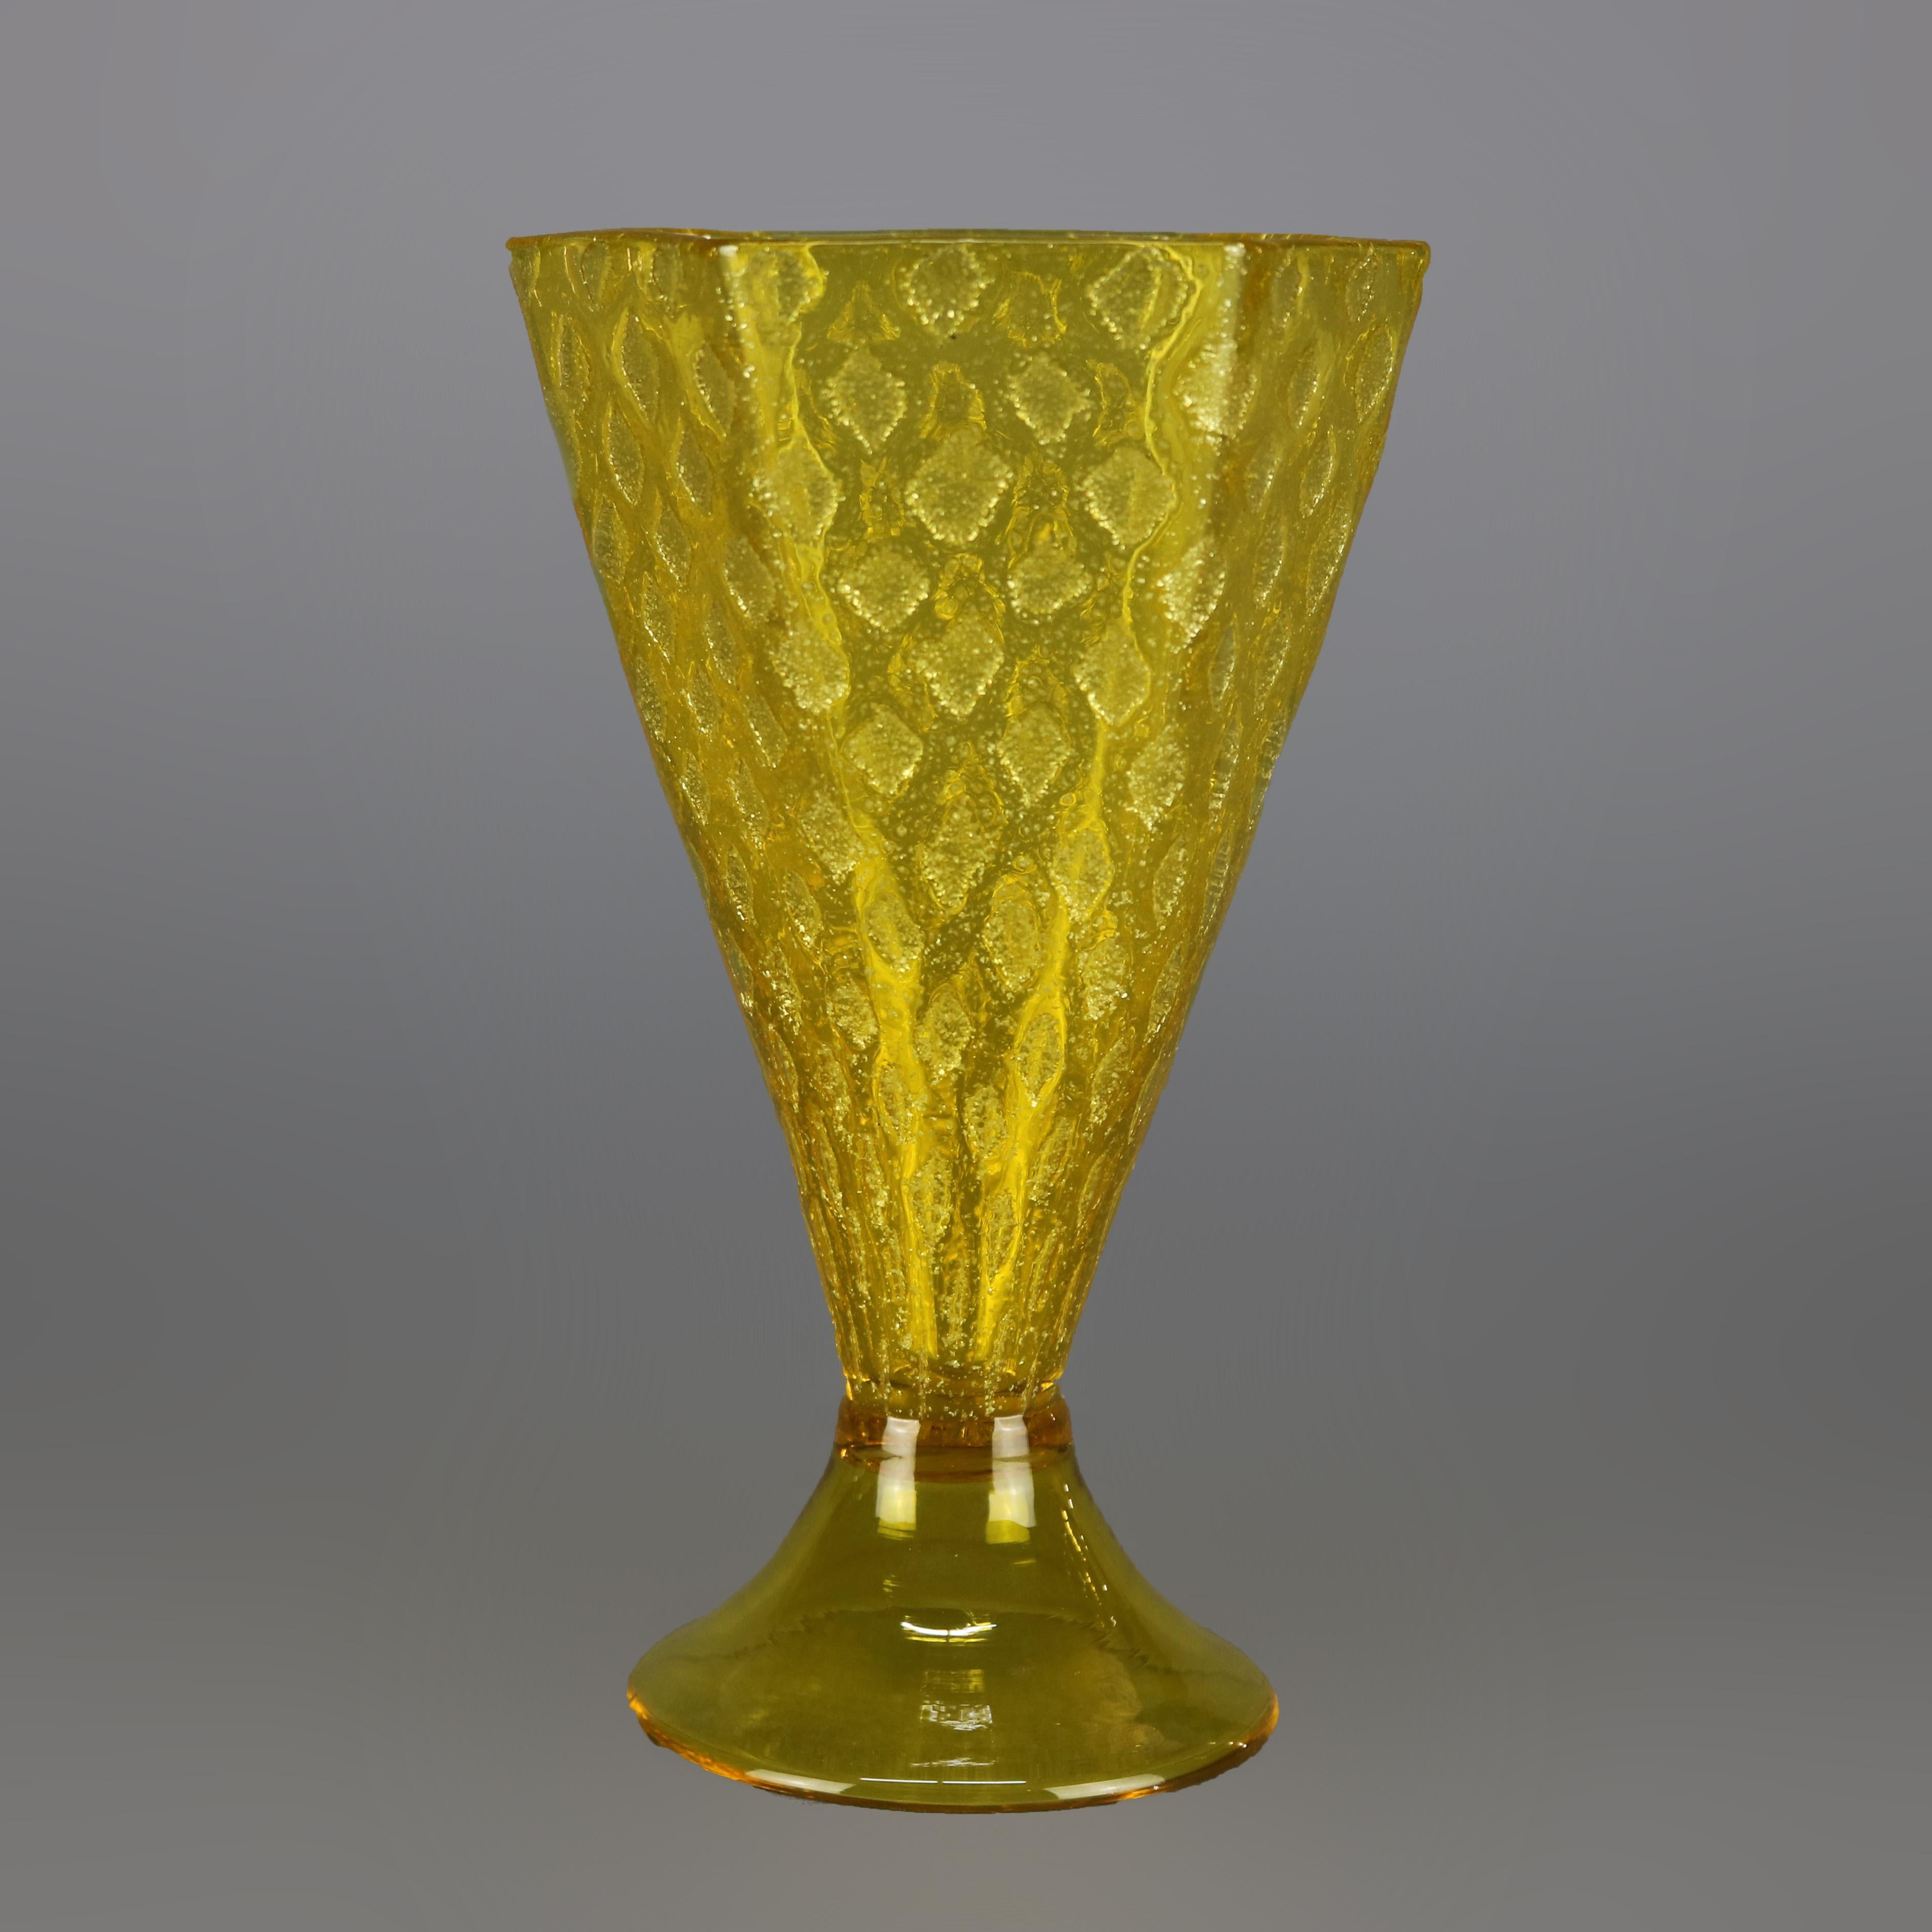 A vintage mouth blown art glass vase by Steuben offers flared and faceted form with sunflower yellow glass having repeating diamond pattern, raised on circular plinth, unsigned, 20th century

Measures: 6.75